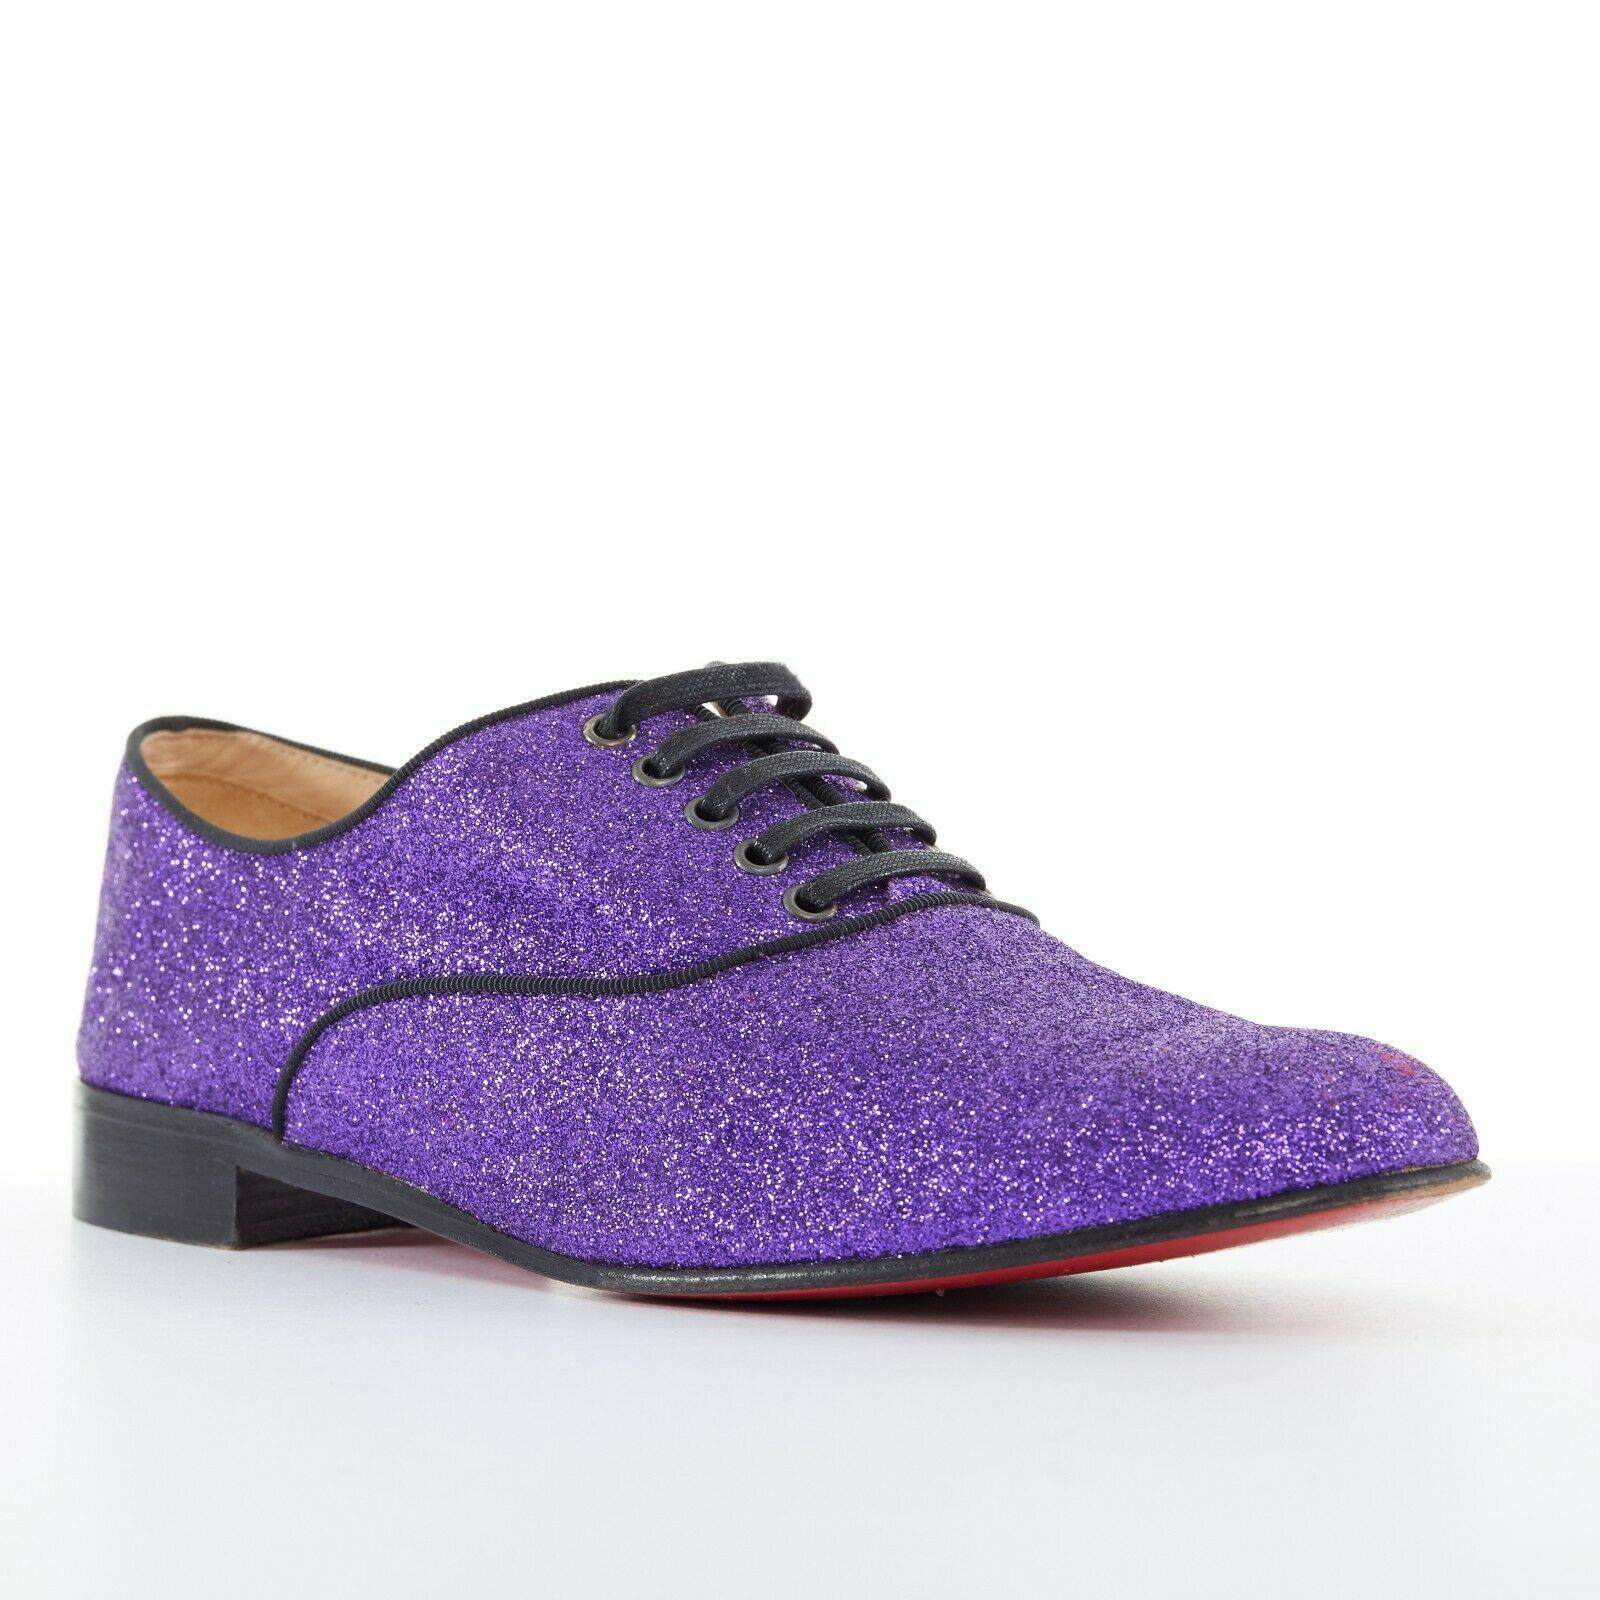 CHRISTIAN LOUBOUTIN Fred Flat purple glitter leather lace derby flat shoe EU37.5
CHRISTIAN LOUBOUTIN
Fred oxford flats. Purple fine glitter covered leather upper. Black grosgrain trimming. 
5-eyelet lace up front. Almond round toe. Black stacked